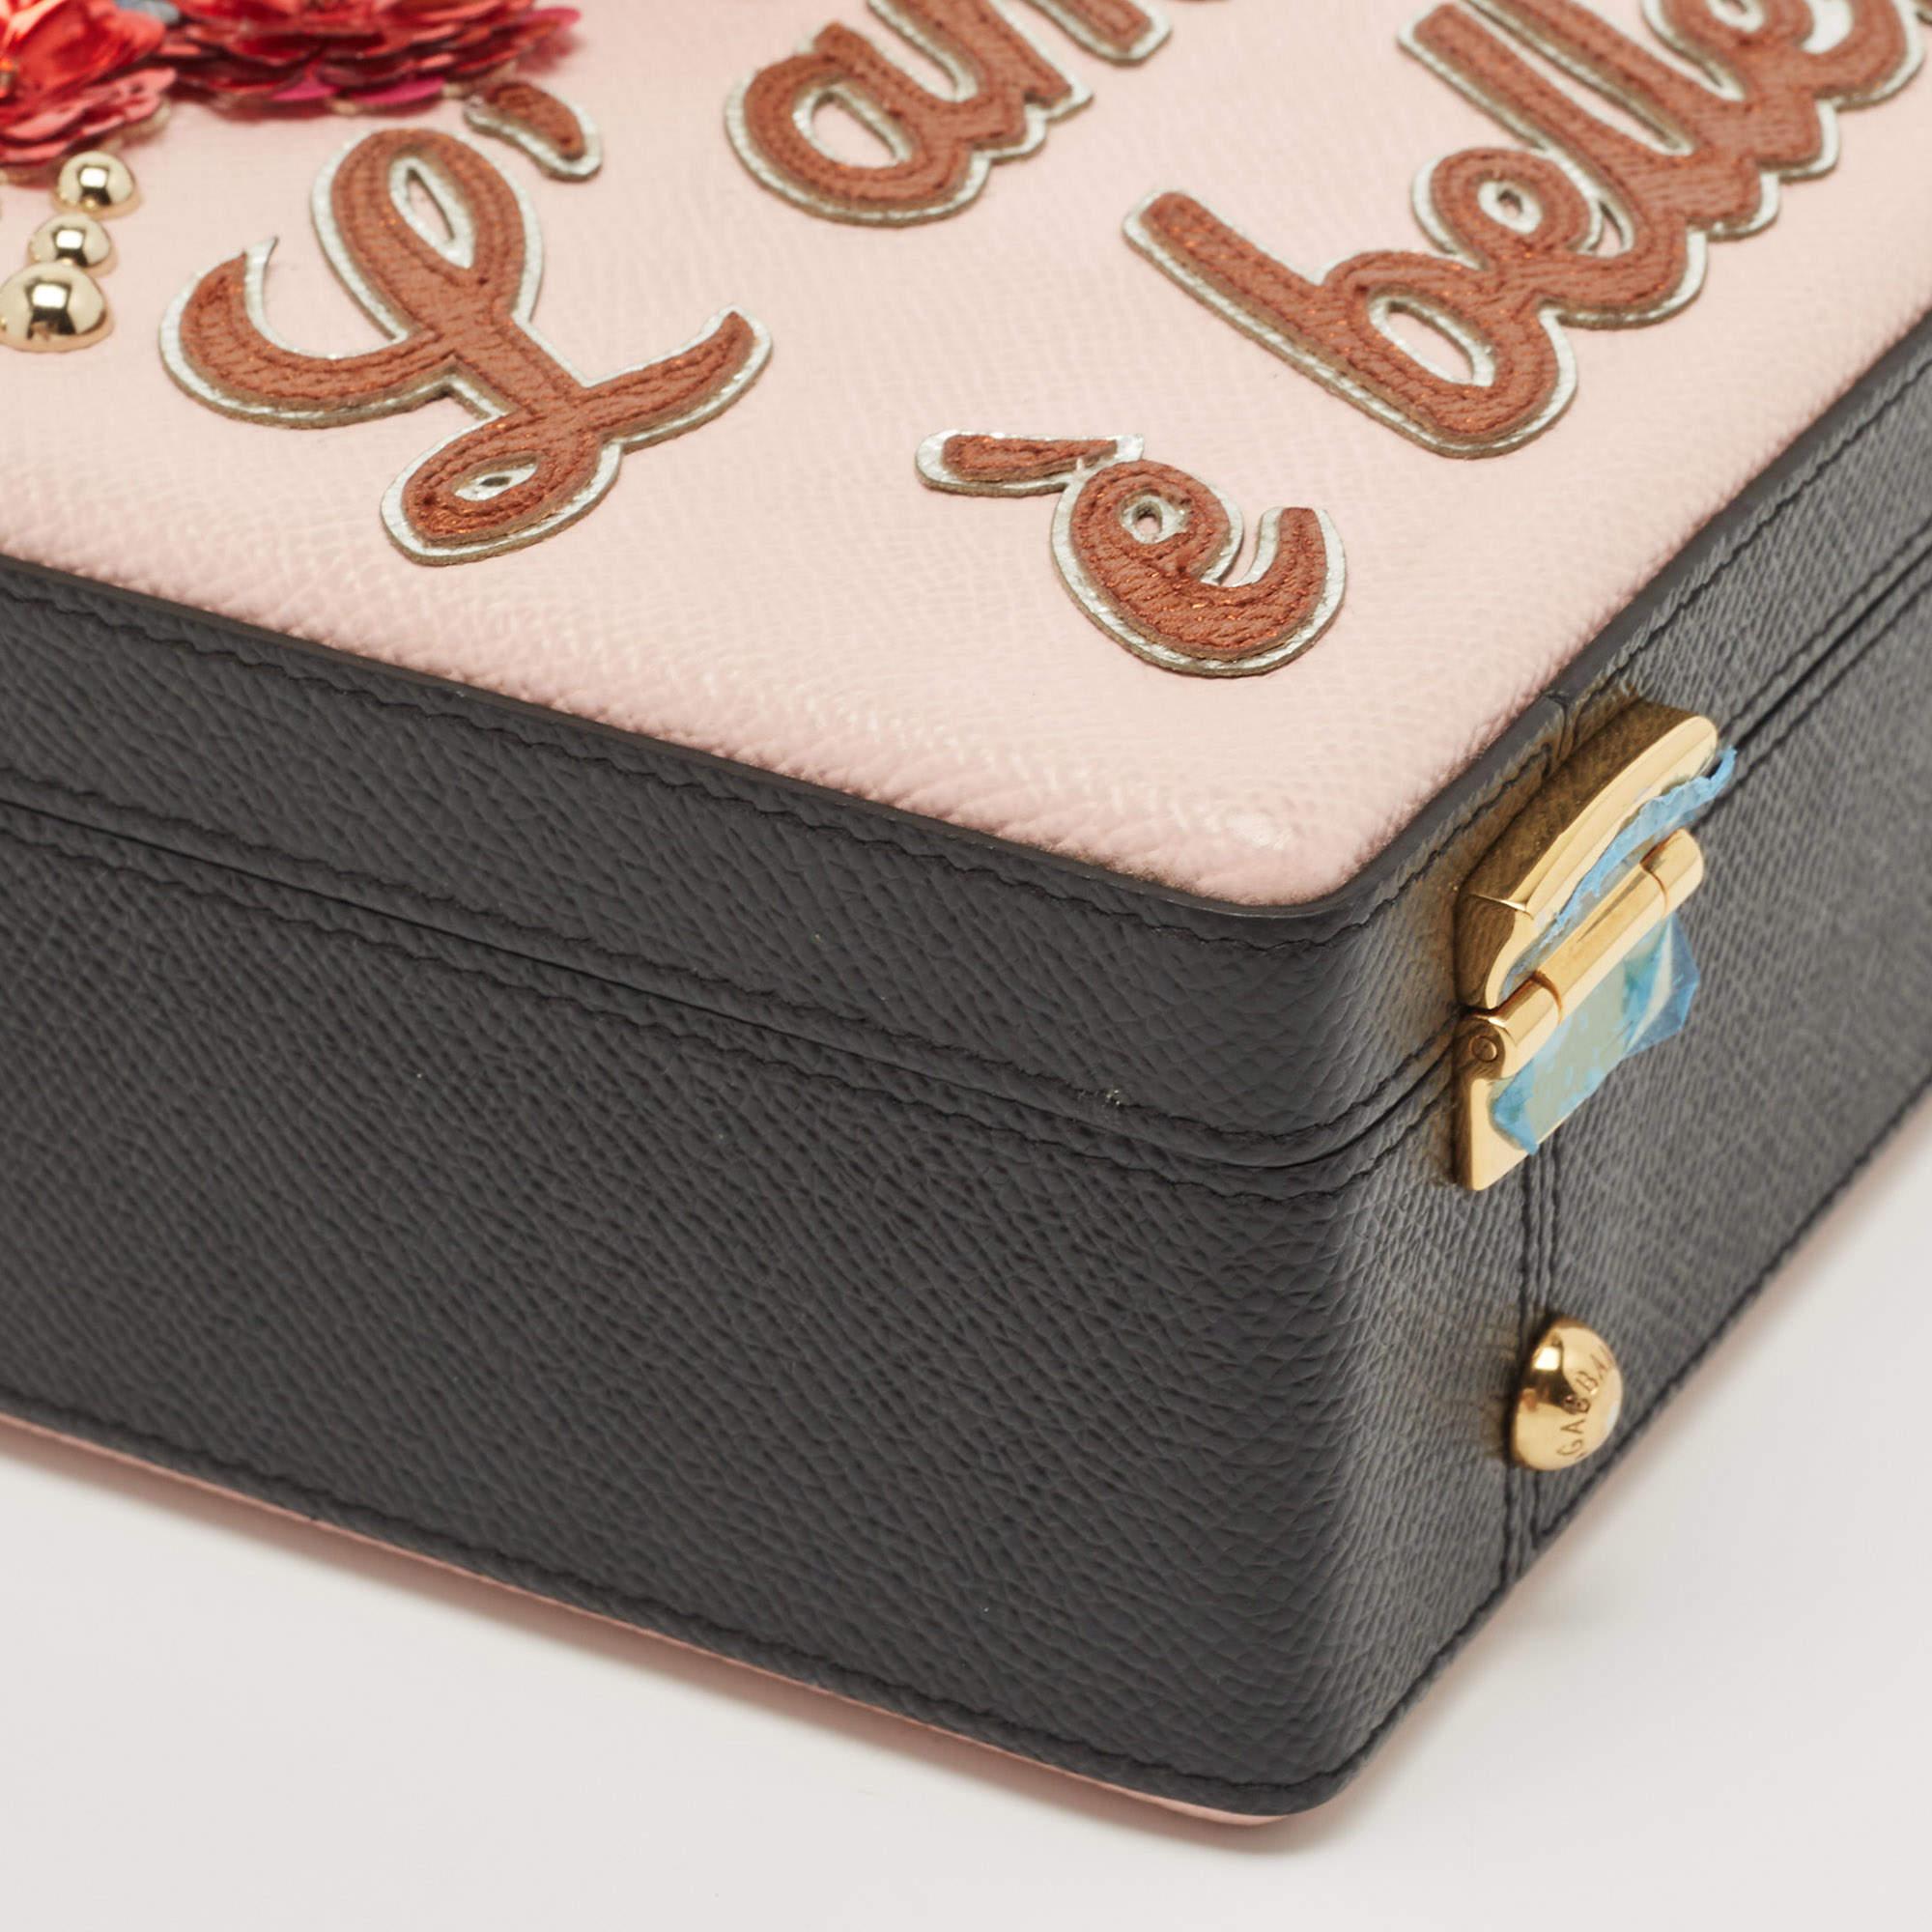 Dolce & Gabbana Pink/Black Embellished Leather Box L' Amore Top Handle Bag In New Condition For Sale In Dubai, Al Qouz 2